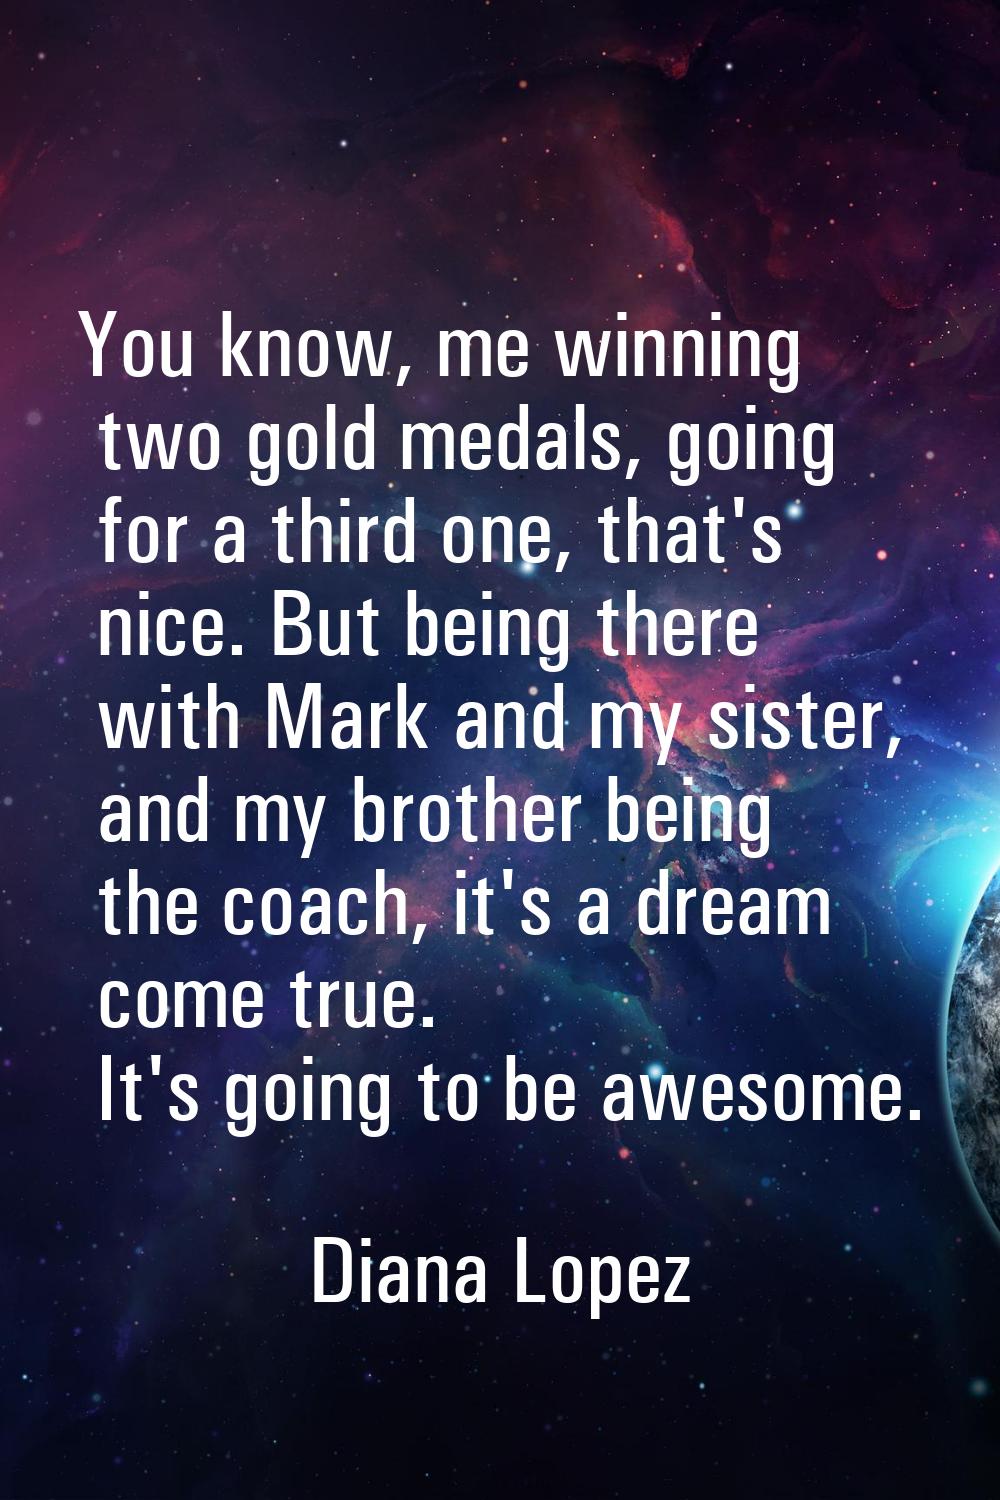 You know, me winning two gold medals, going for a third one, that's nice. But being there with Mark